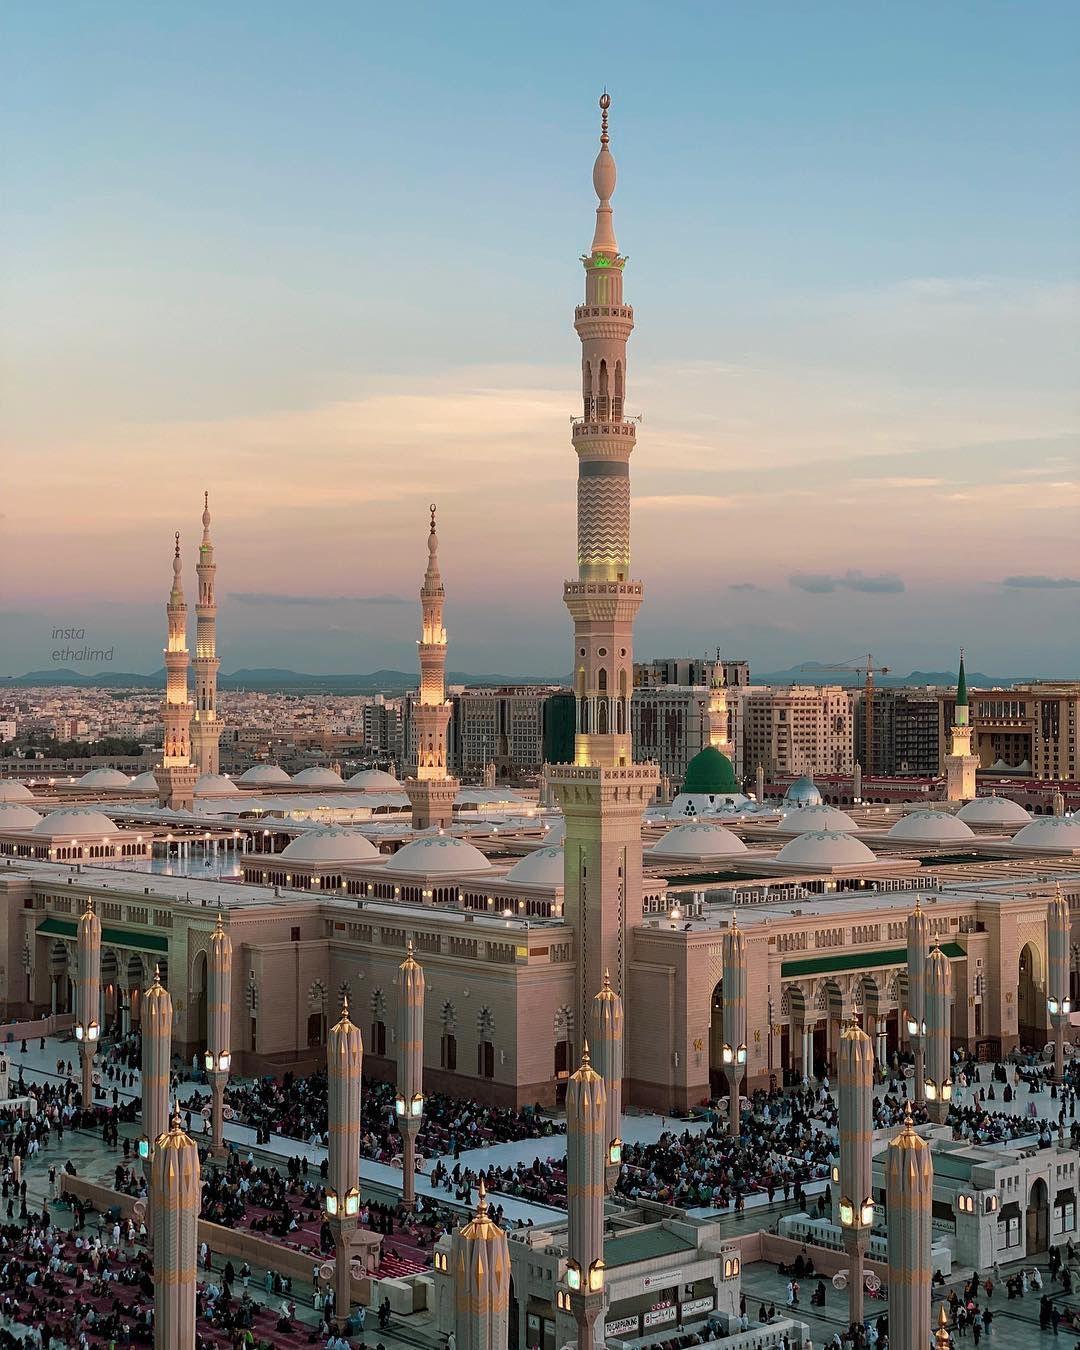 Masjid Nabawi HD Wallpapers 2014 - Articles about Islam